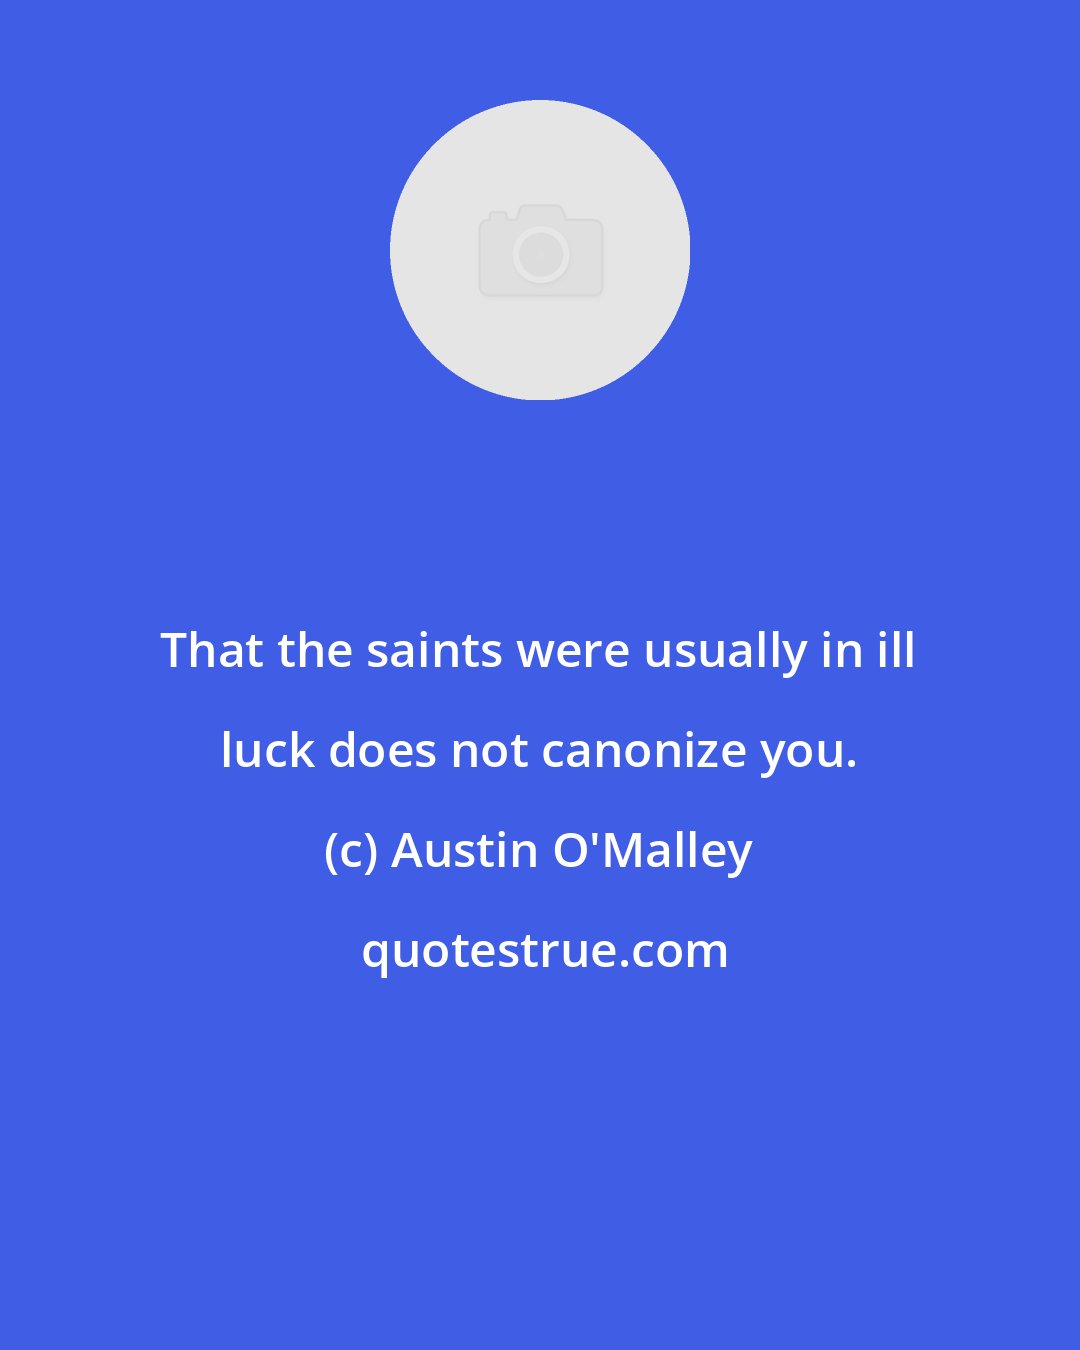 Austin O'Malley: That the saints were usually in ill luck does not canonize you.